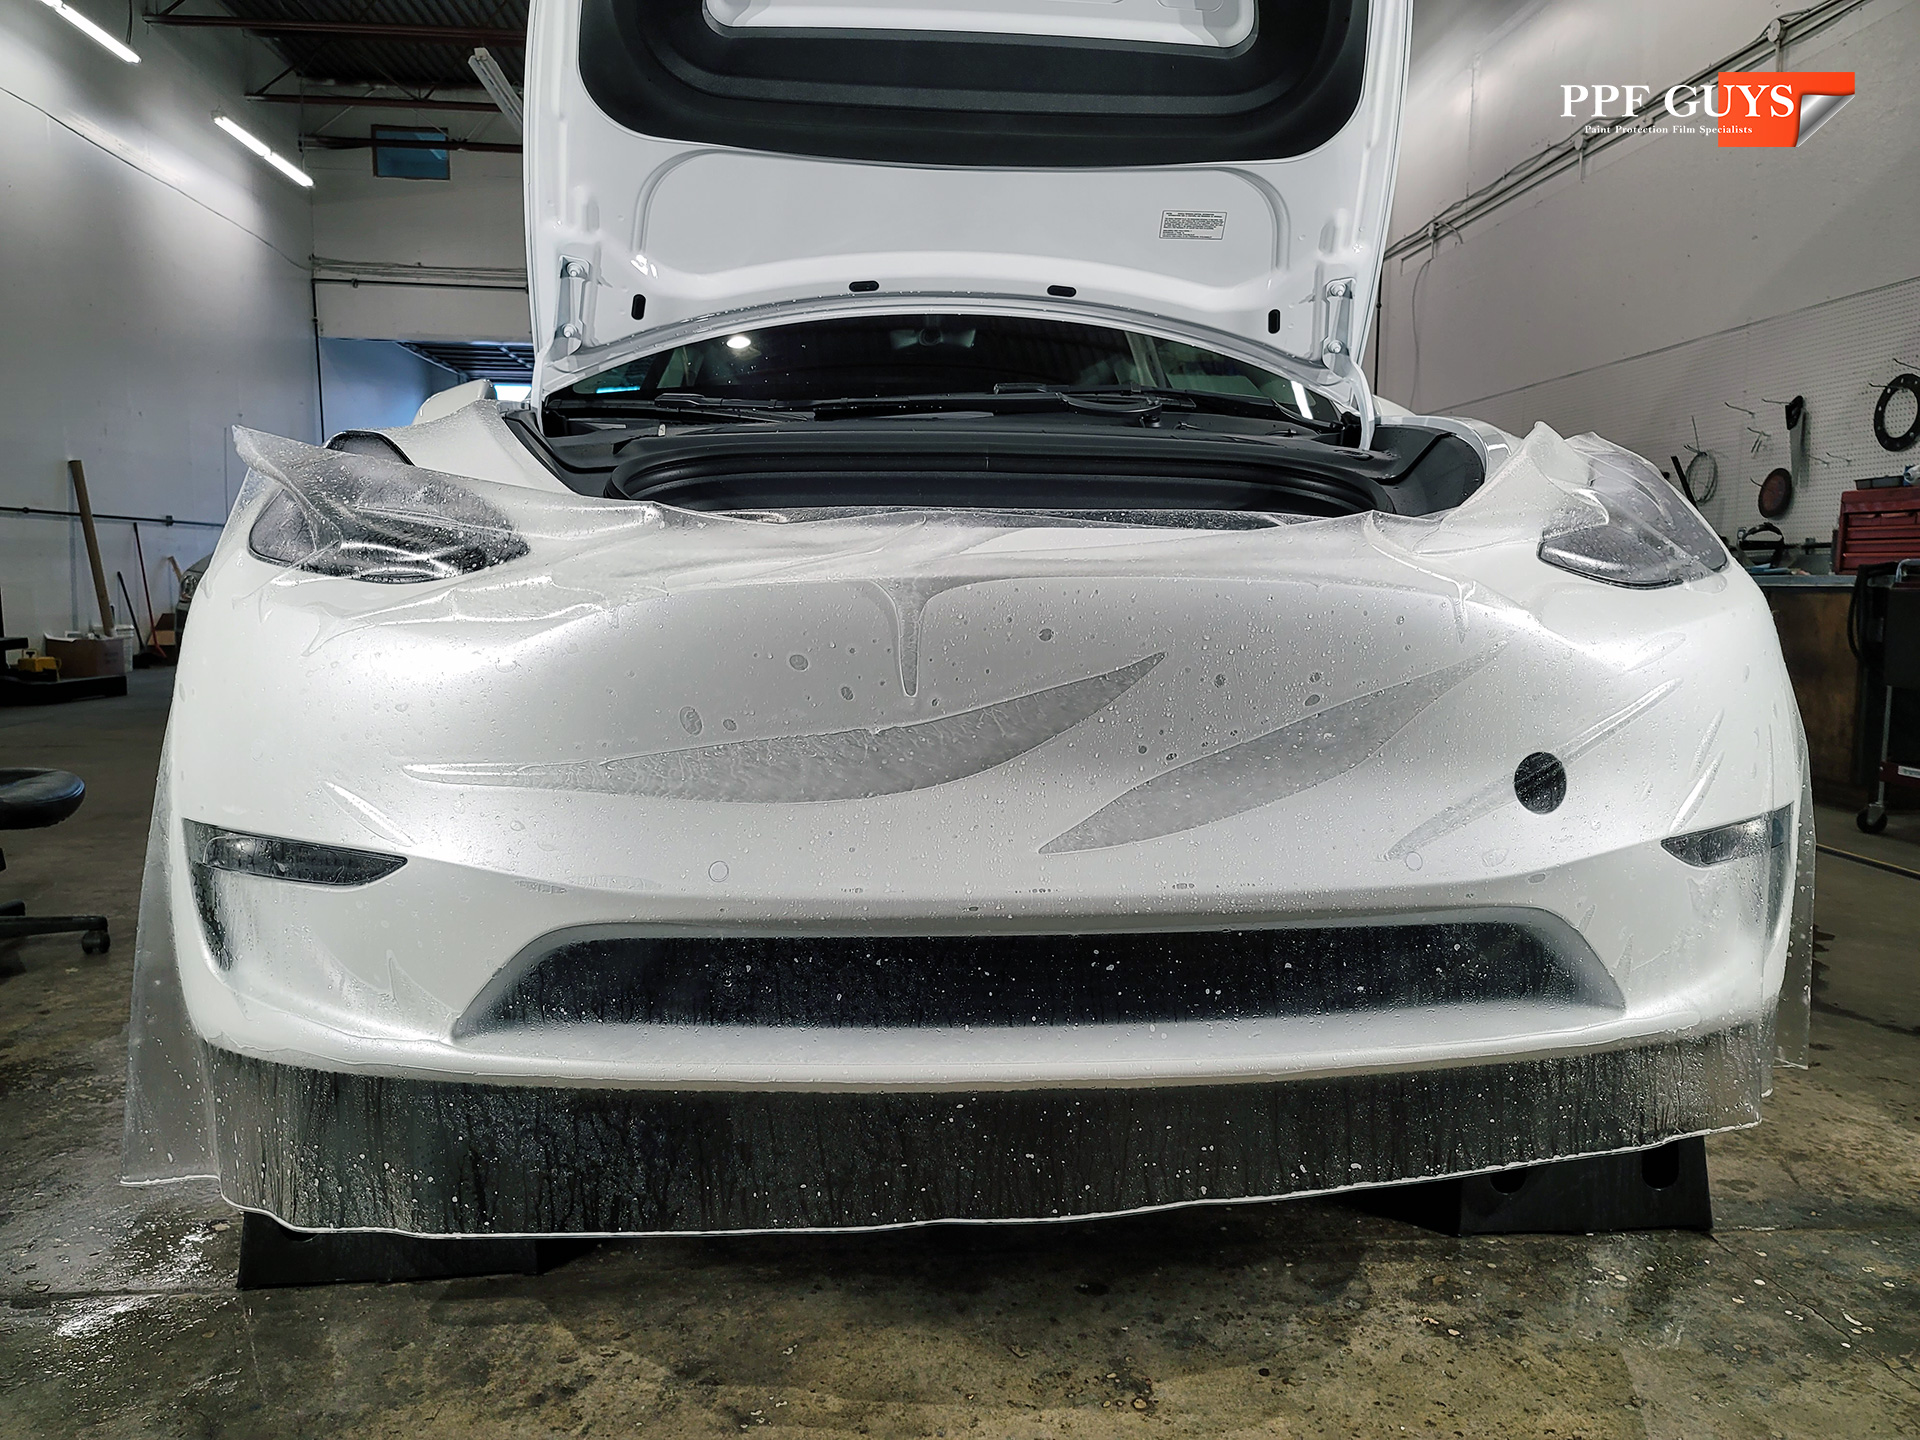 PPF Guys Model Y White Xpel Stealth, ceramic, painted emblems (1).jpg